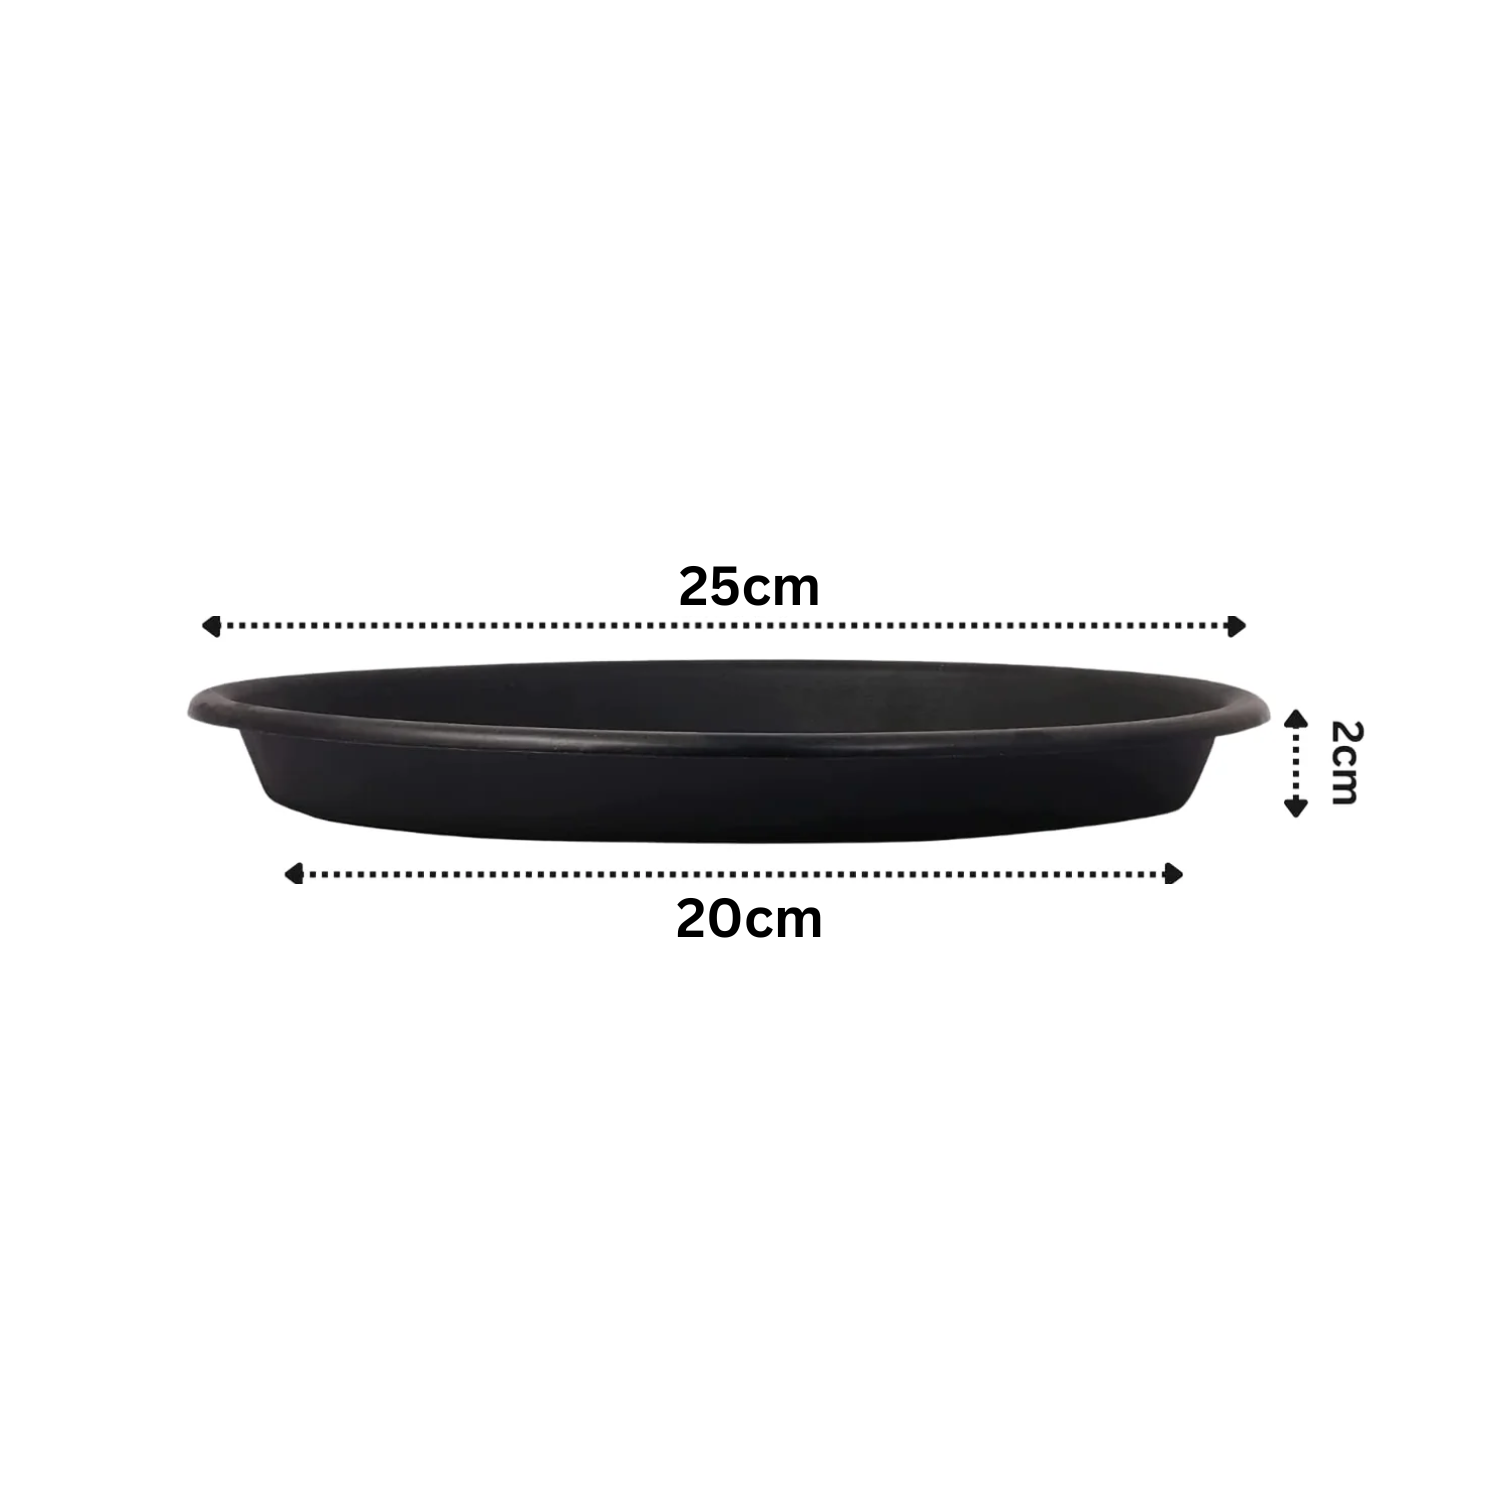 Hug A Plant|UV Treated Round Bottom Tray Suitable for 10 inch Round Plastic Pot|Heavy Duty Highly Durable Tray for Indoor Home & Garden Decor (25CM|10INCH)